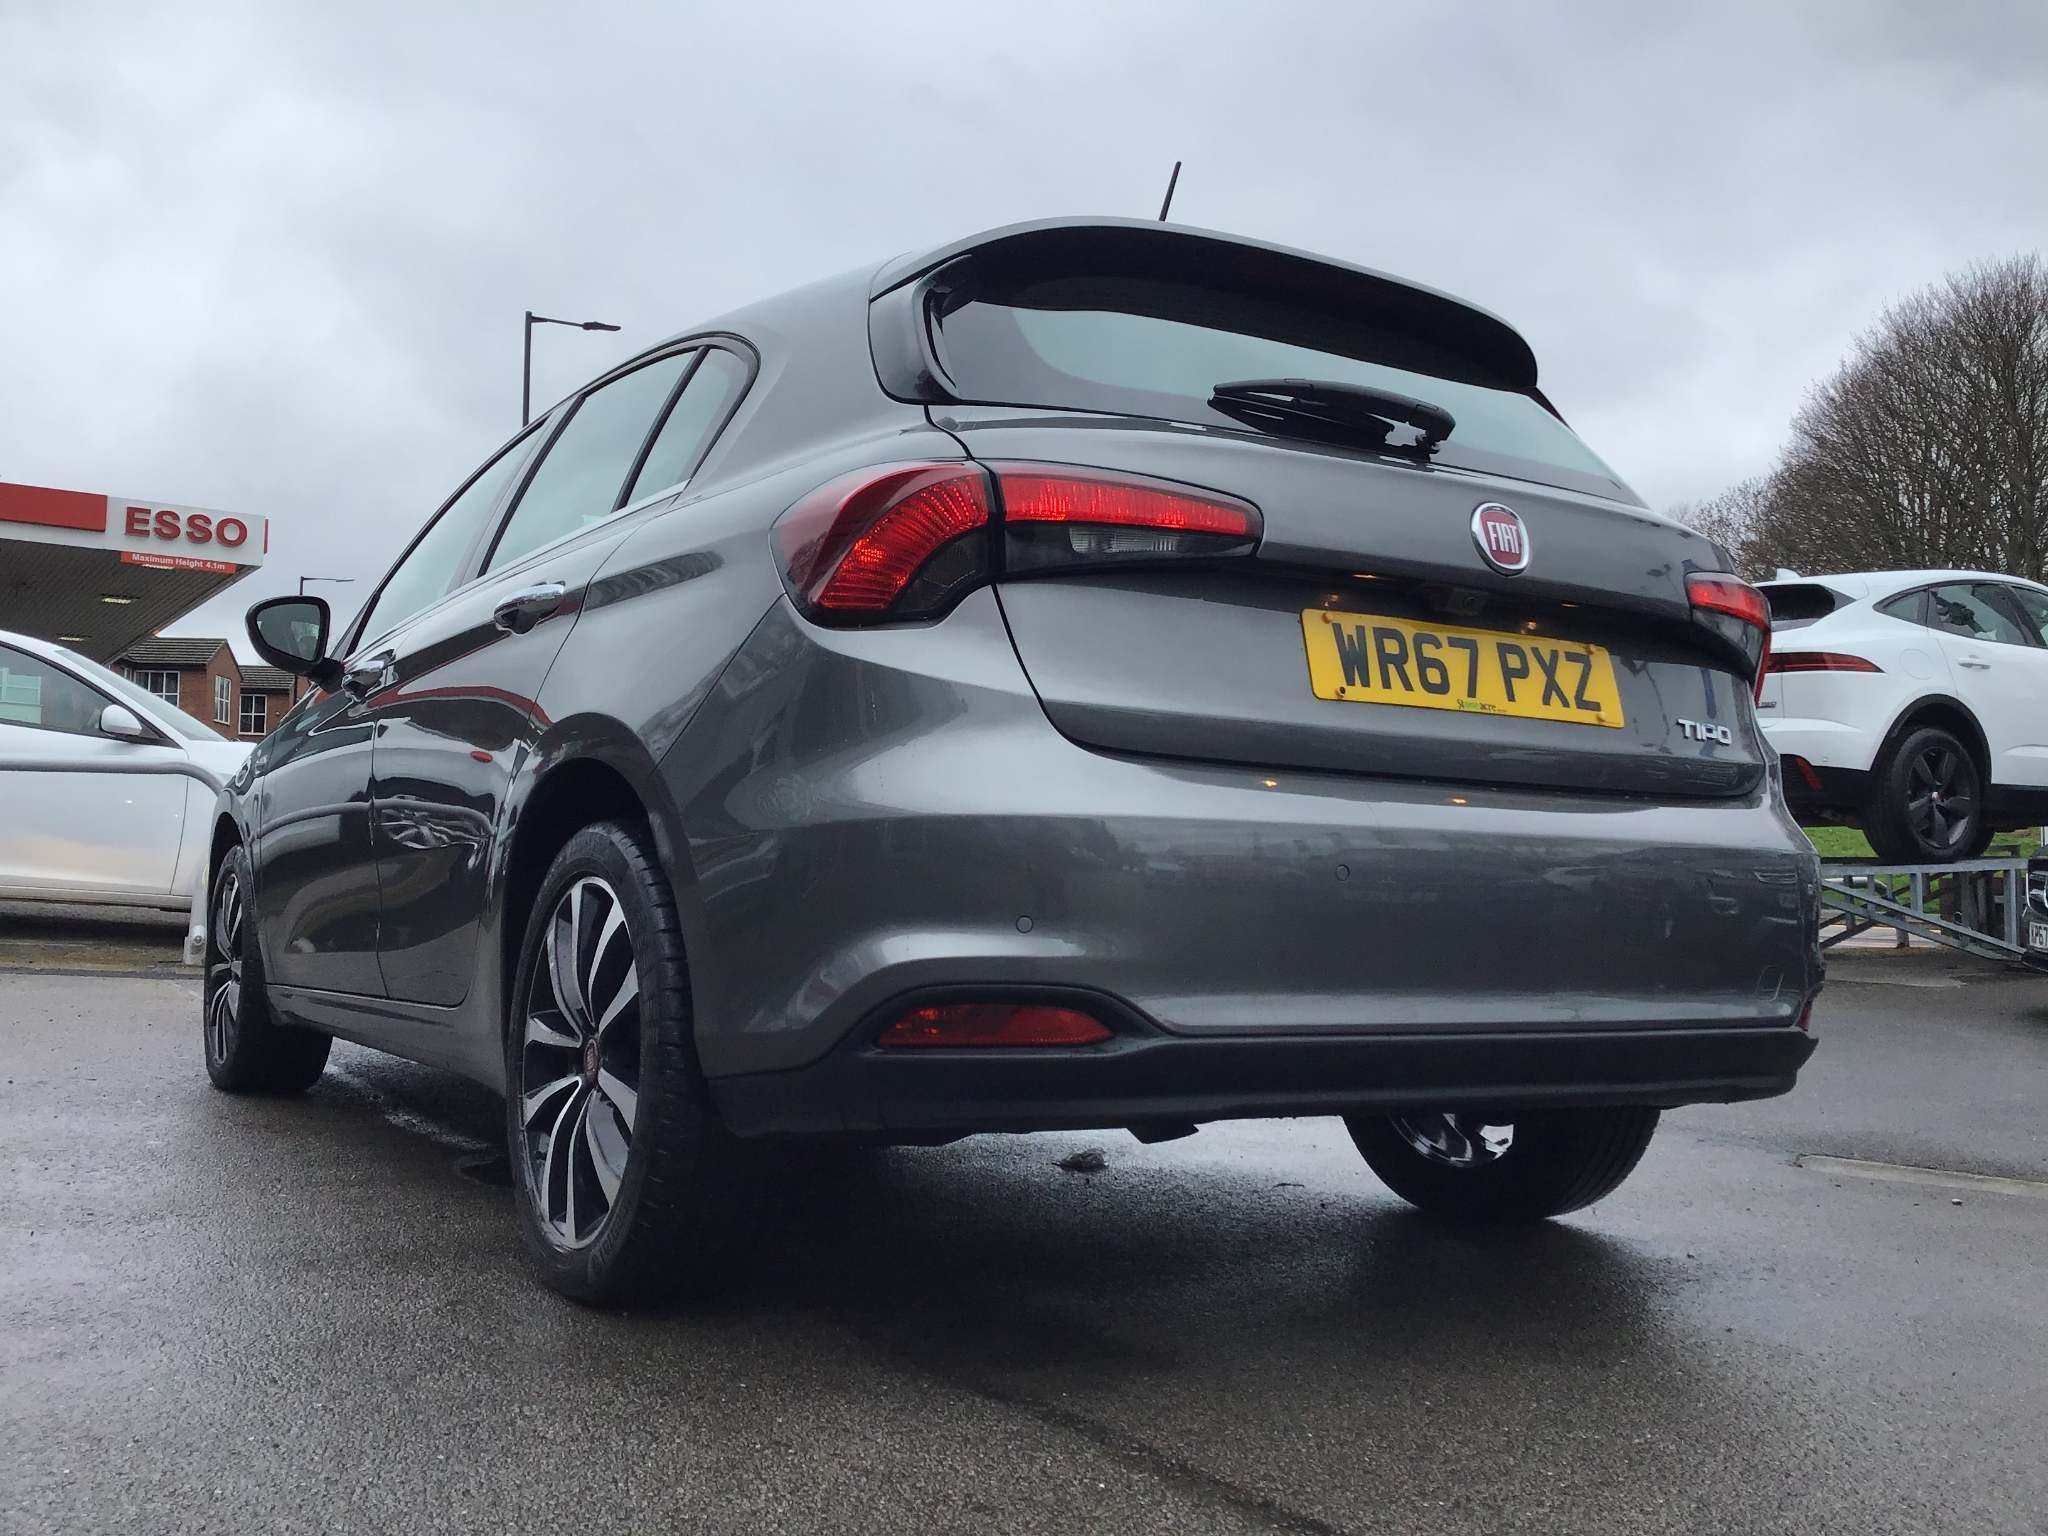 Used Fiat Tipo 1.4 Lounge 5dr (WR67PXZ) Stoneacre